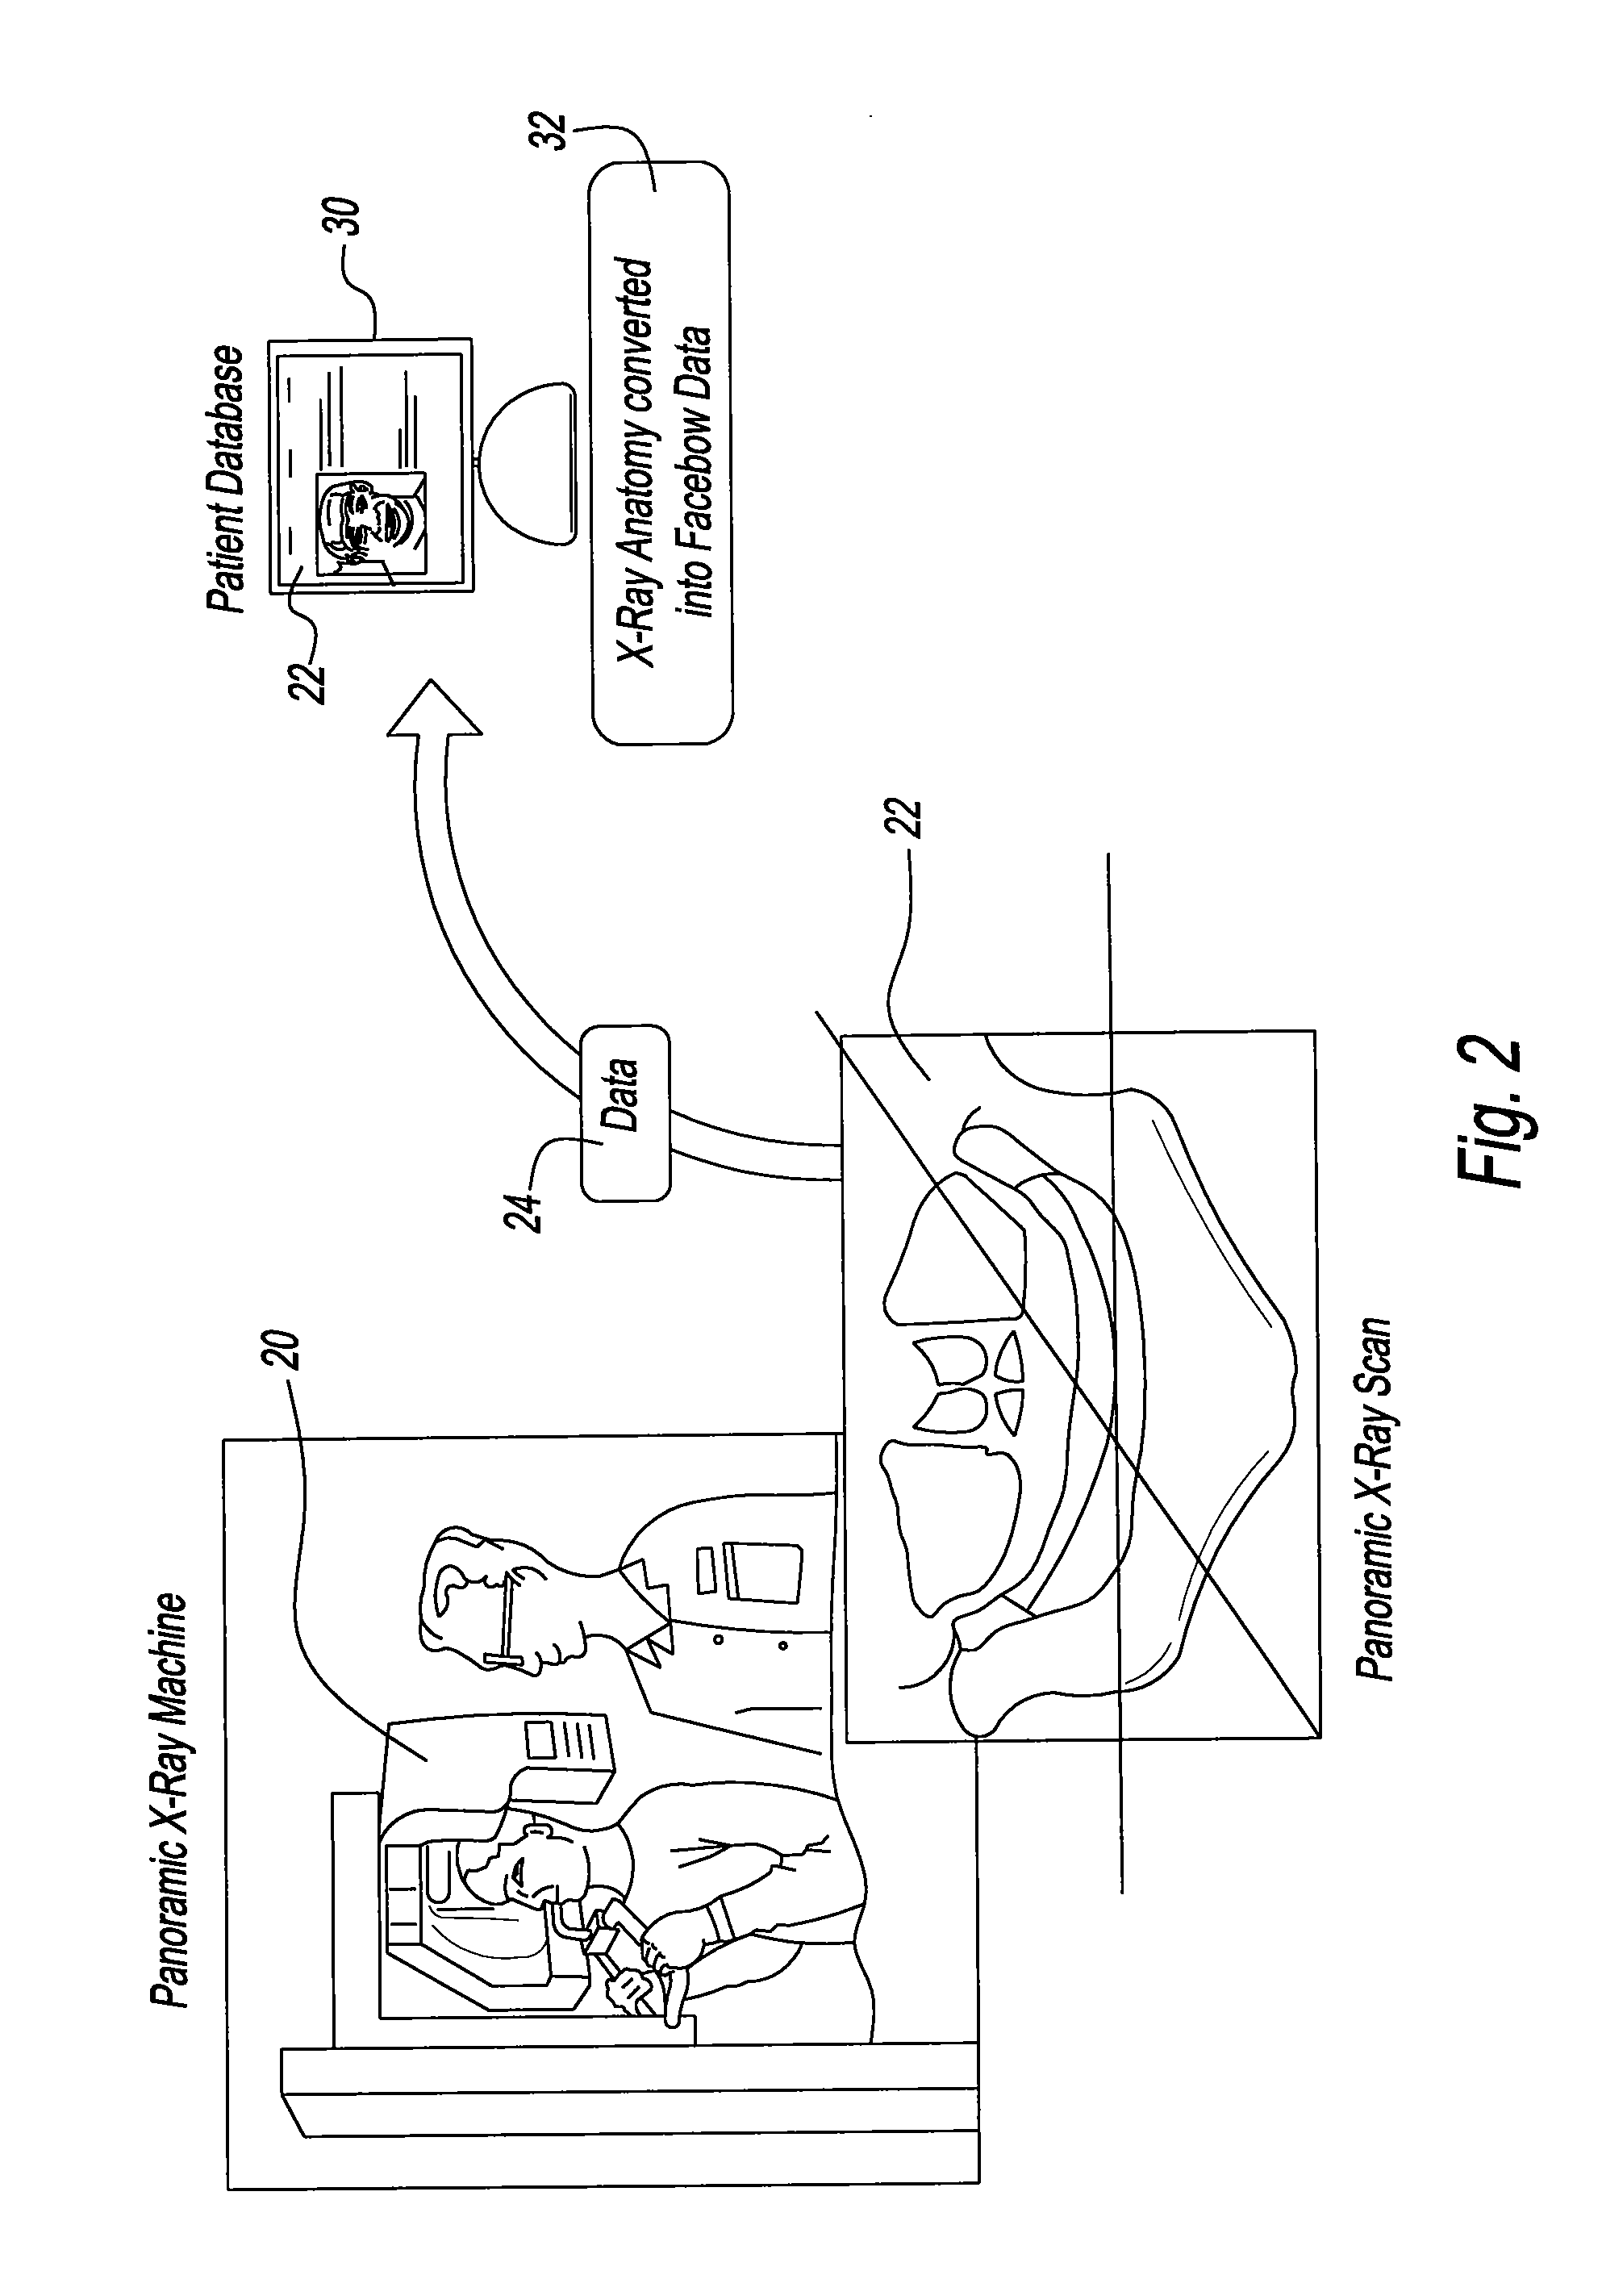 Method and Apparatus for Electronically Modeling and Manufacturing Dentures